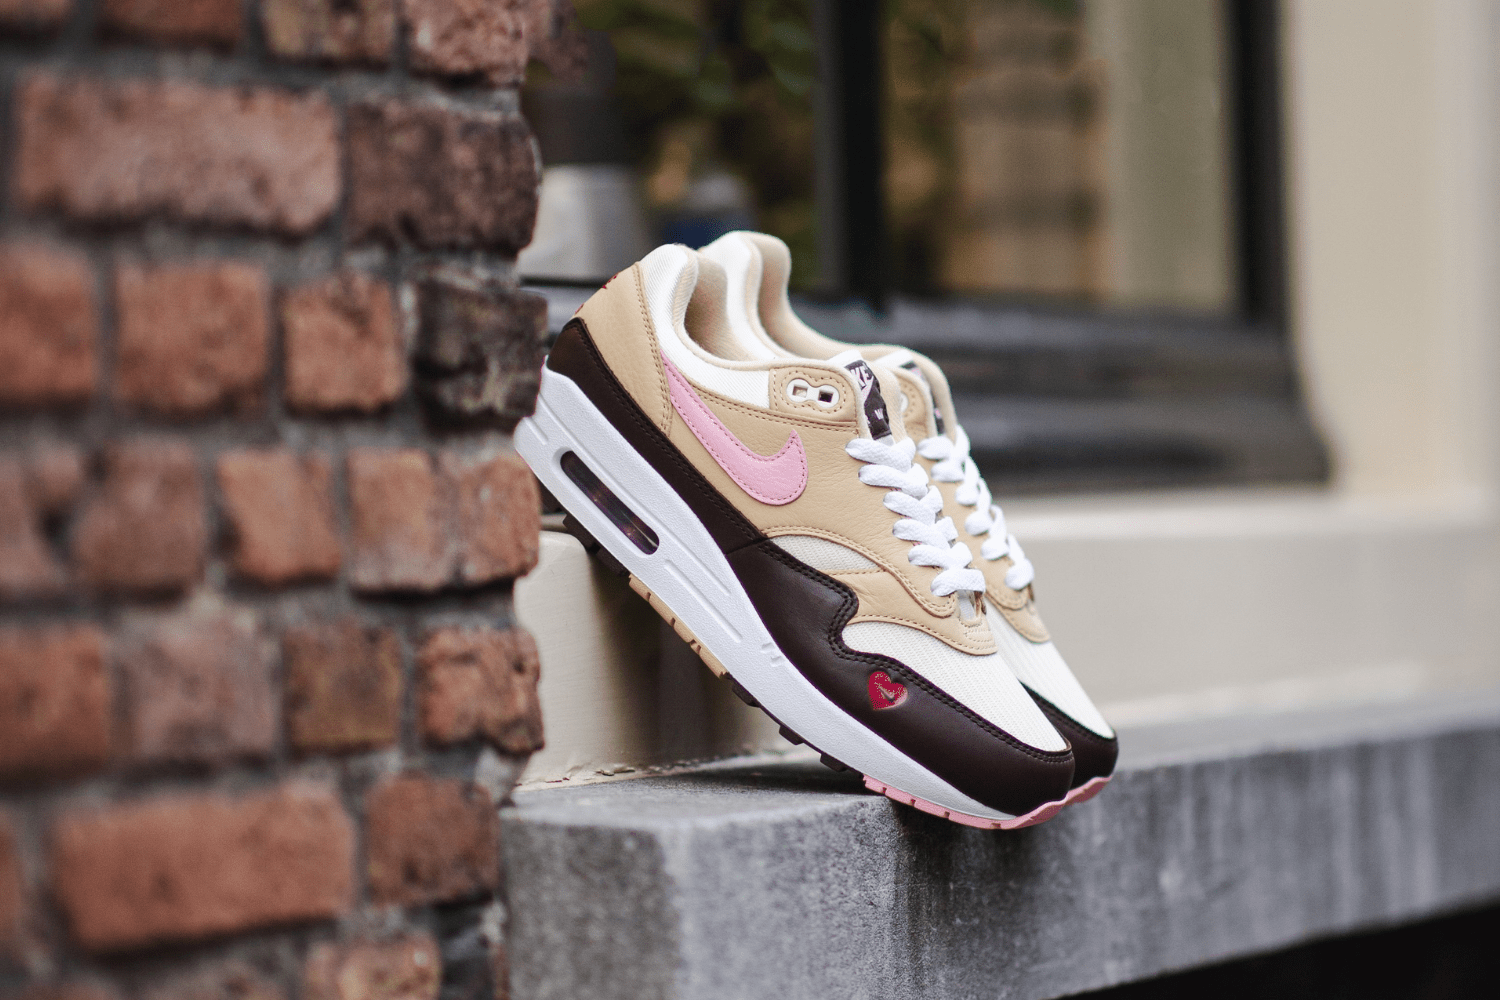 The Nike Air Max 1 WMNS 'Valentine's Day' gets a restock